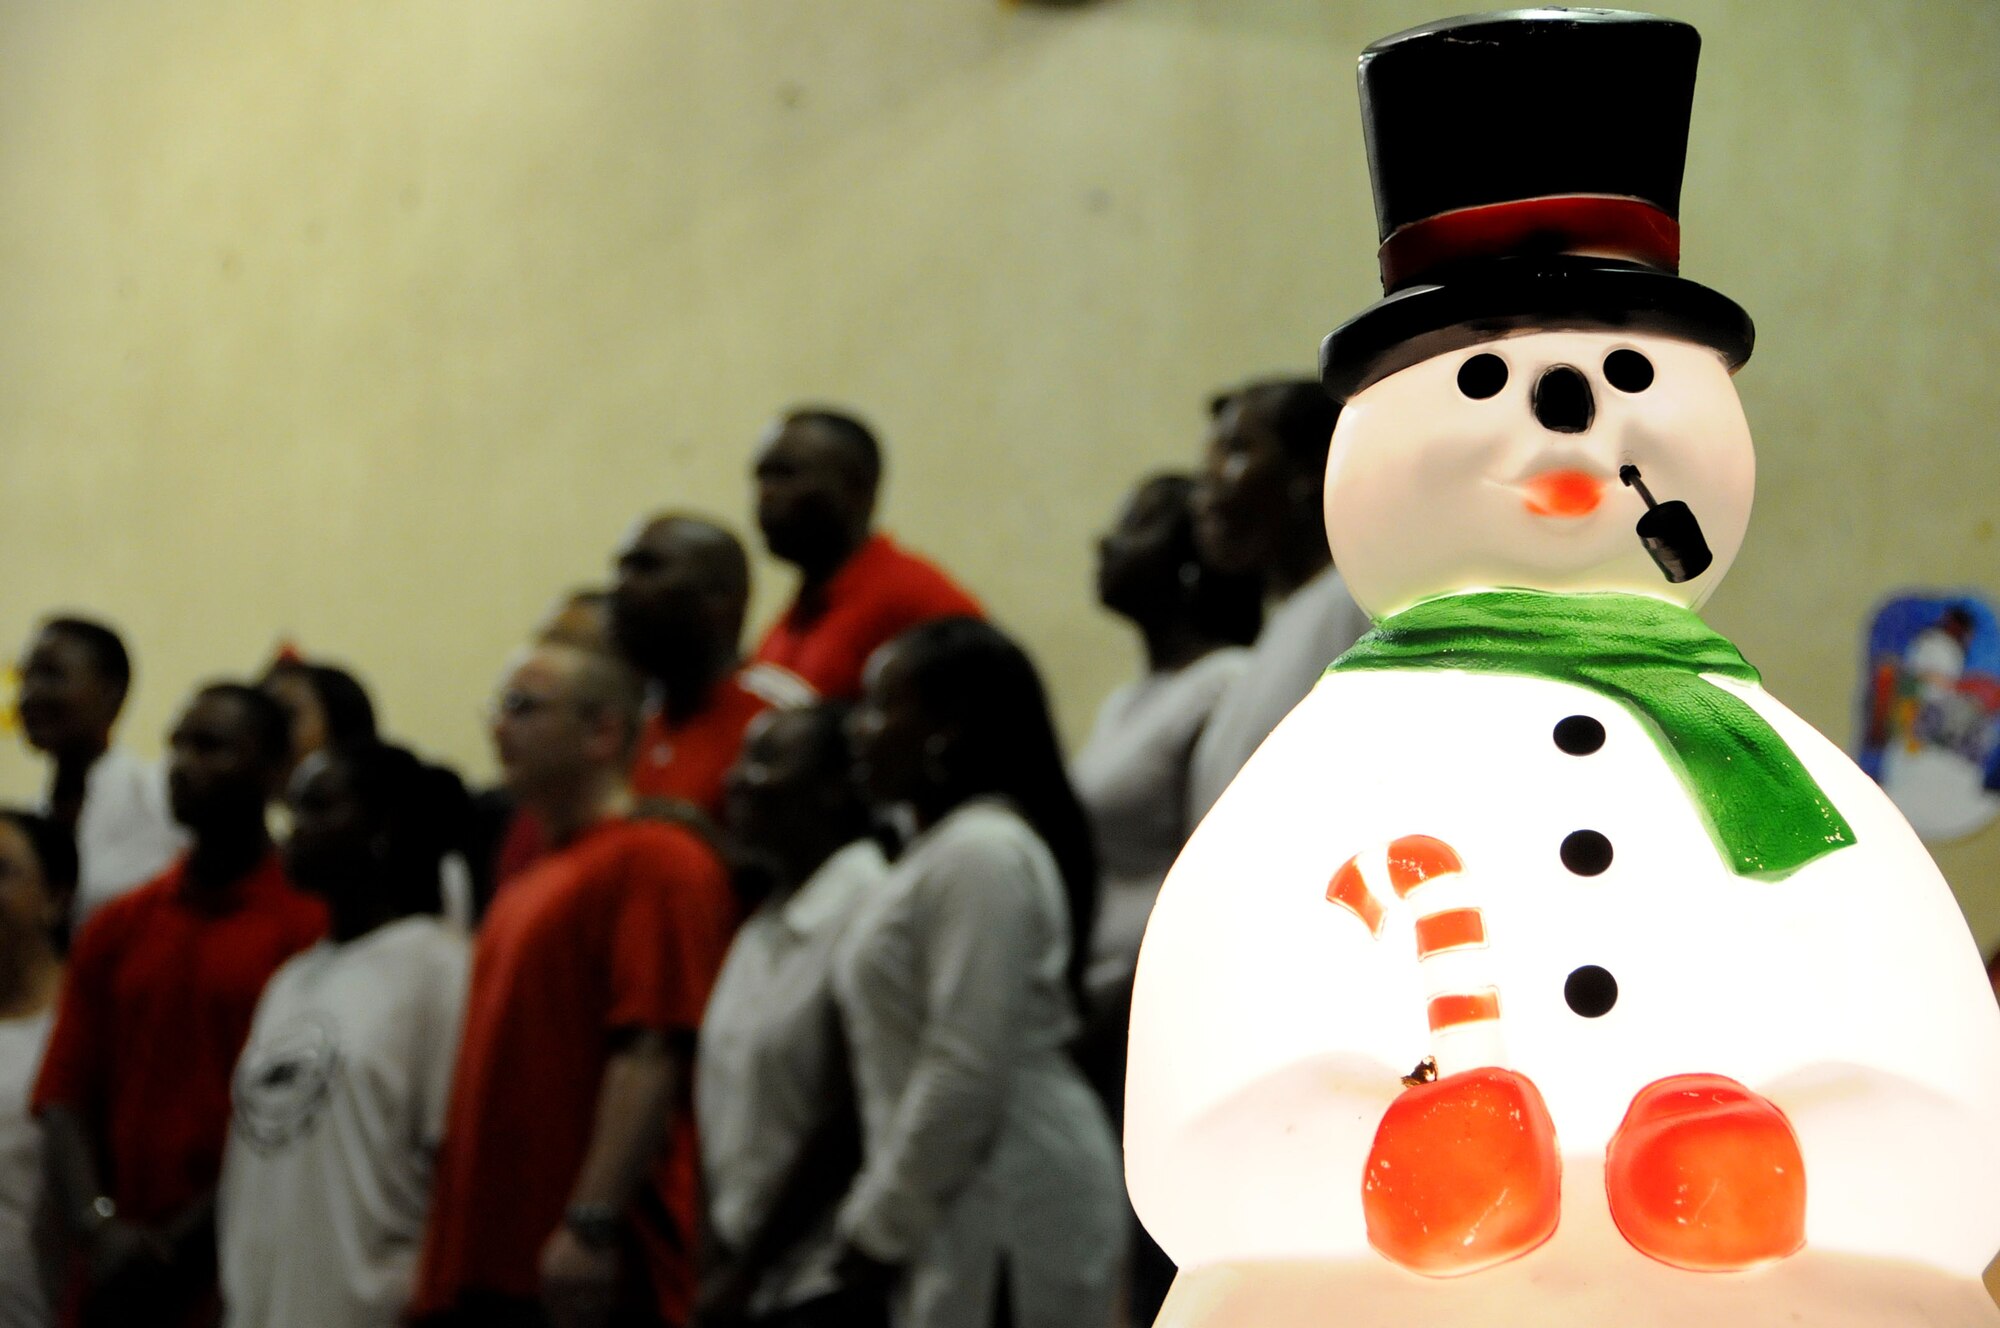 ANDERSEN AIR FORCE BASE, Guam - As frosty looks on, a gospel choir belts out a joyful tune here Dec. 4 during the Christmas Tree Lighting celebration. Guests were able to listen to a wide variety of music during the event. (U.S. Air Force photo by Airman 1st Class Courtney Witt)
